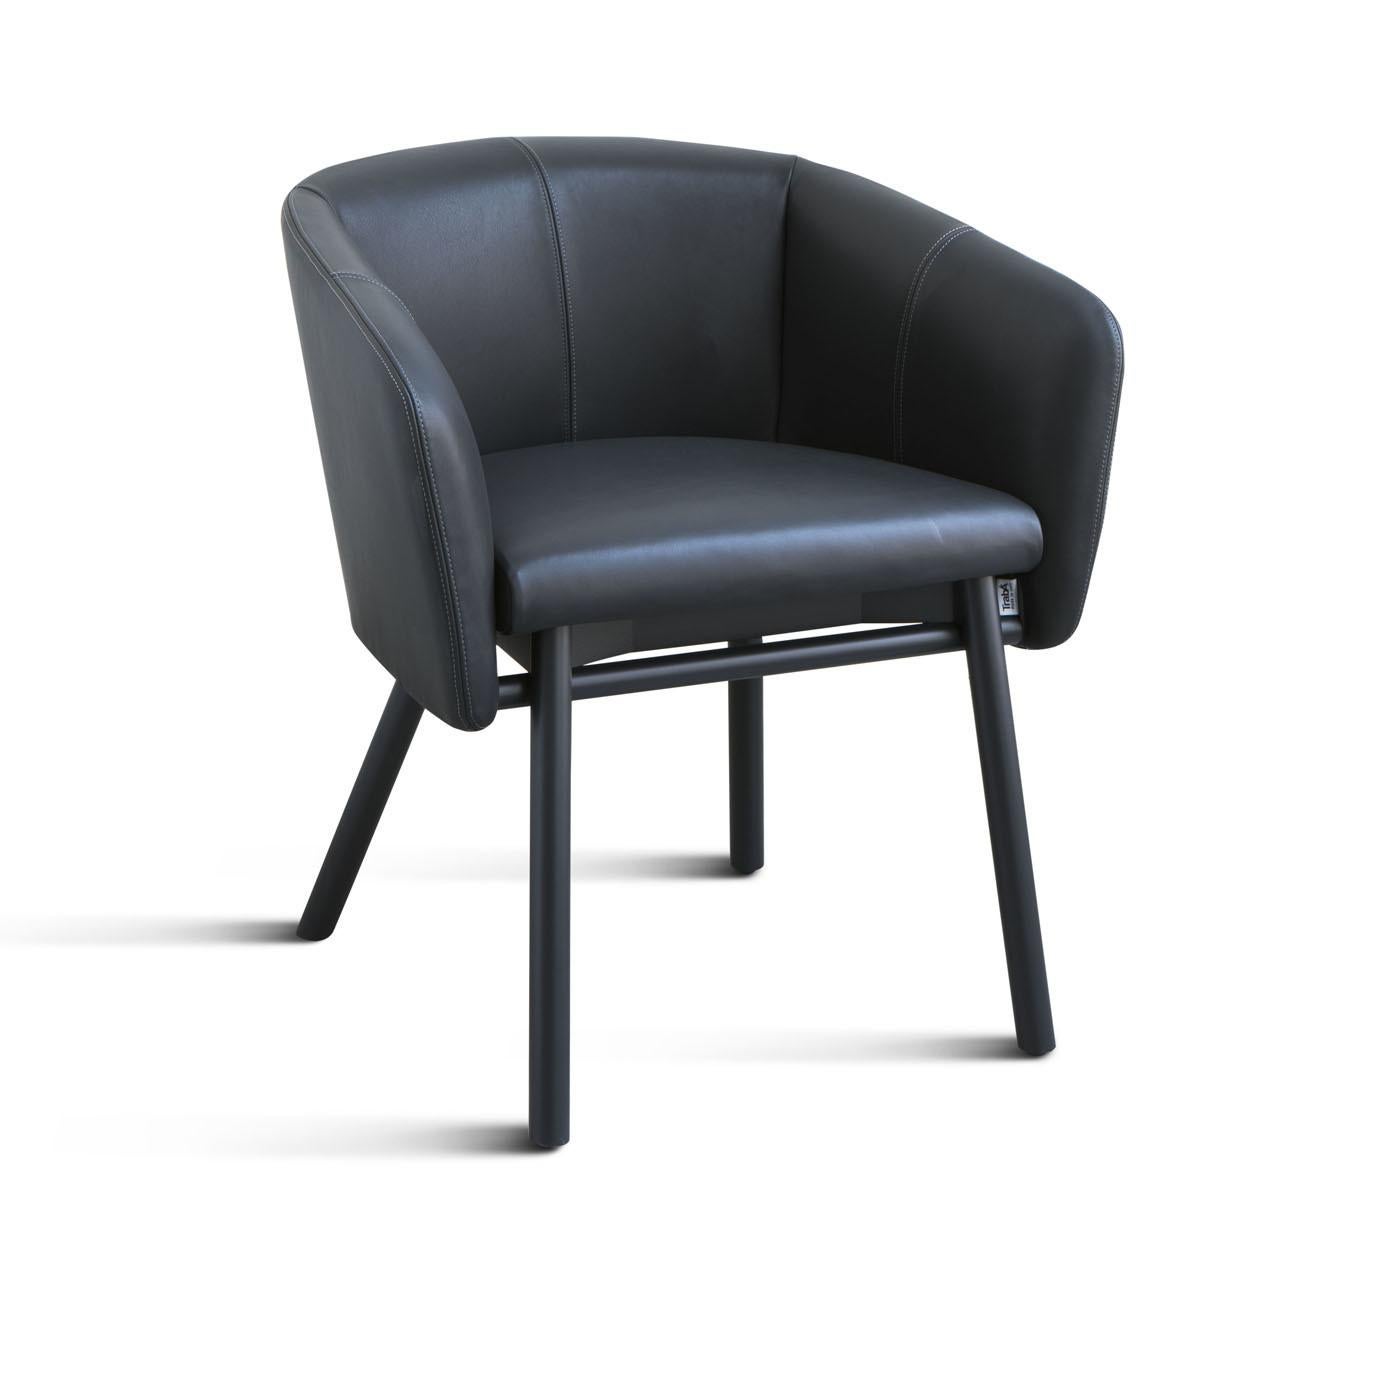 Simple and sophisticated, this chair is an exquisite piece of functional decor, taking inspiration from the traditional tub chair with a welcoming silhouette. Its gorgeous design features a black-polished beechwood with slanted legs, and a leather